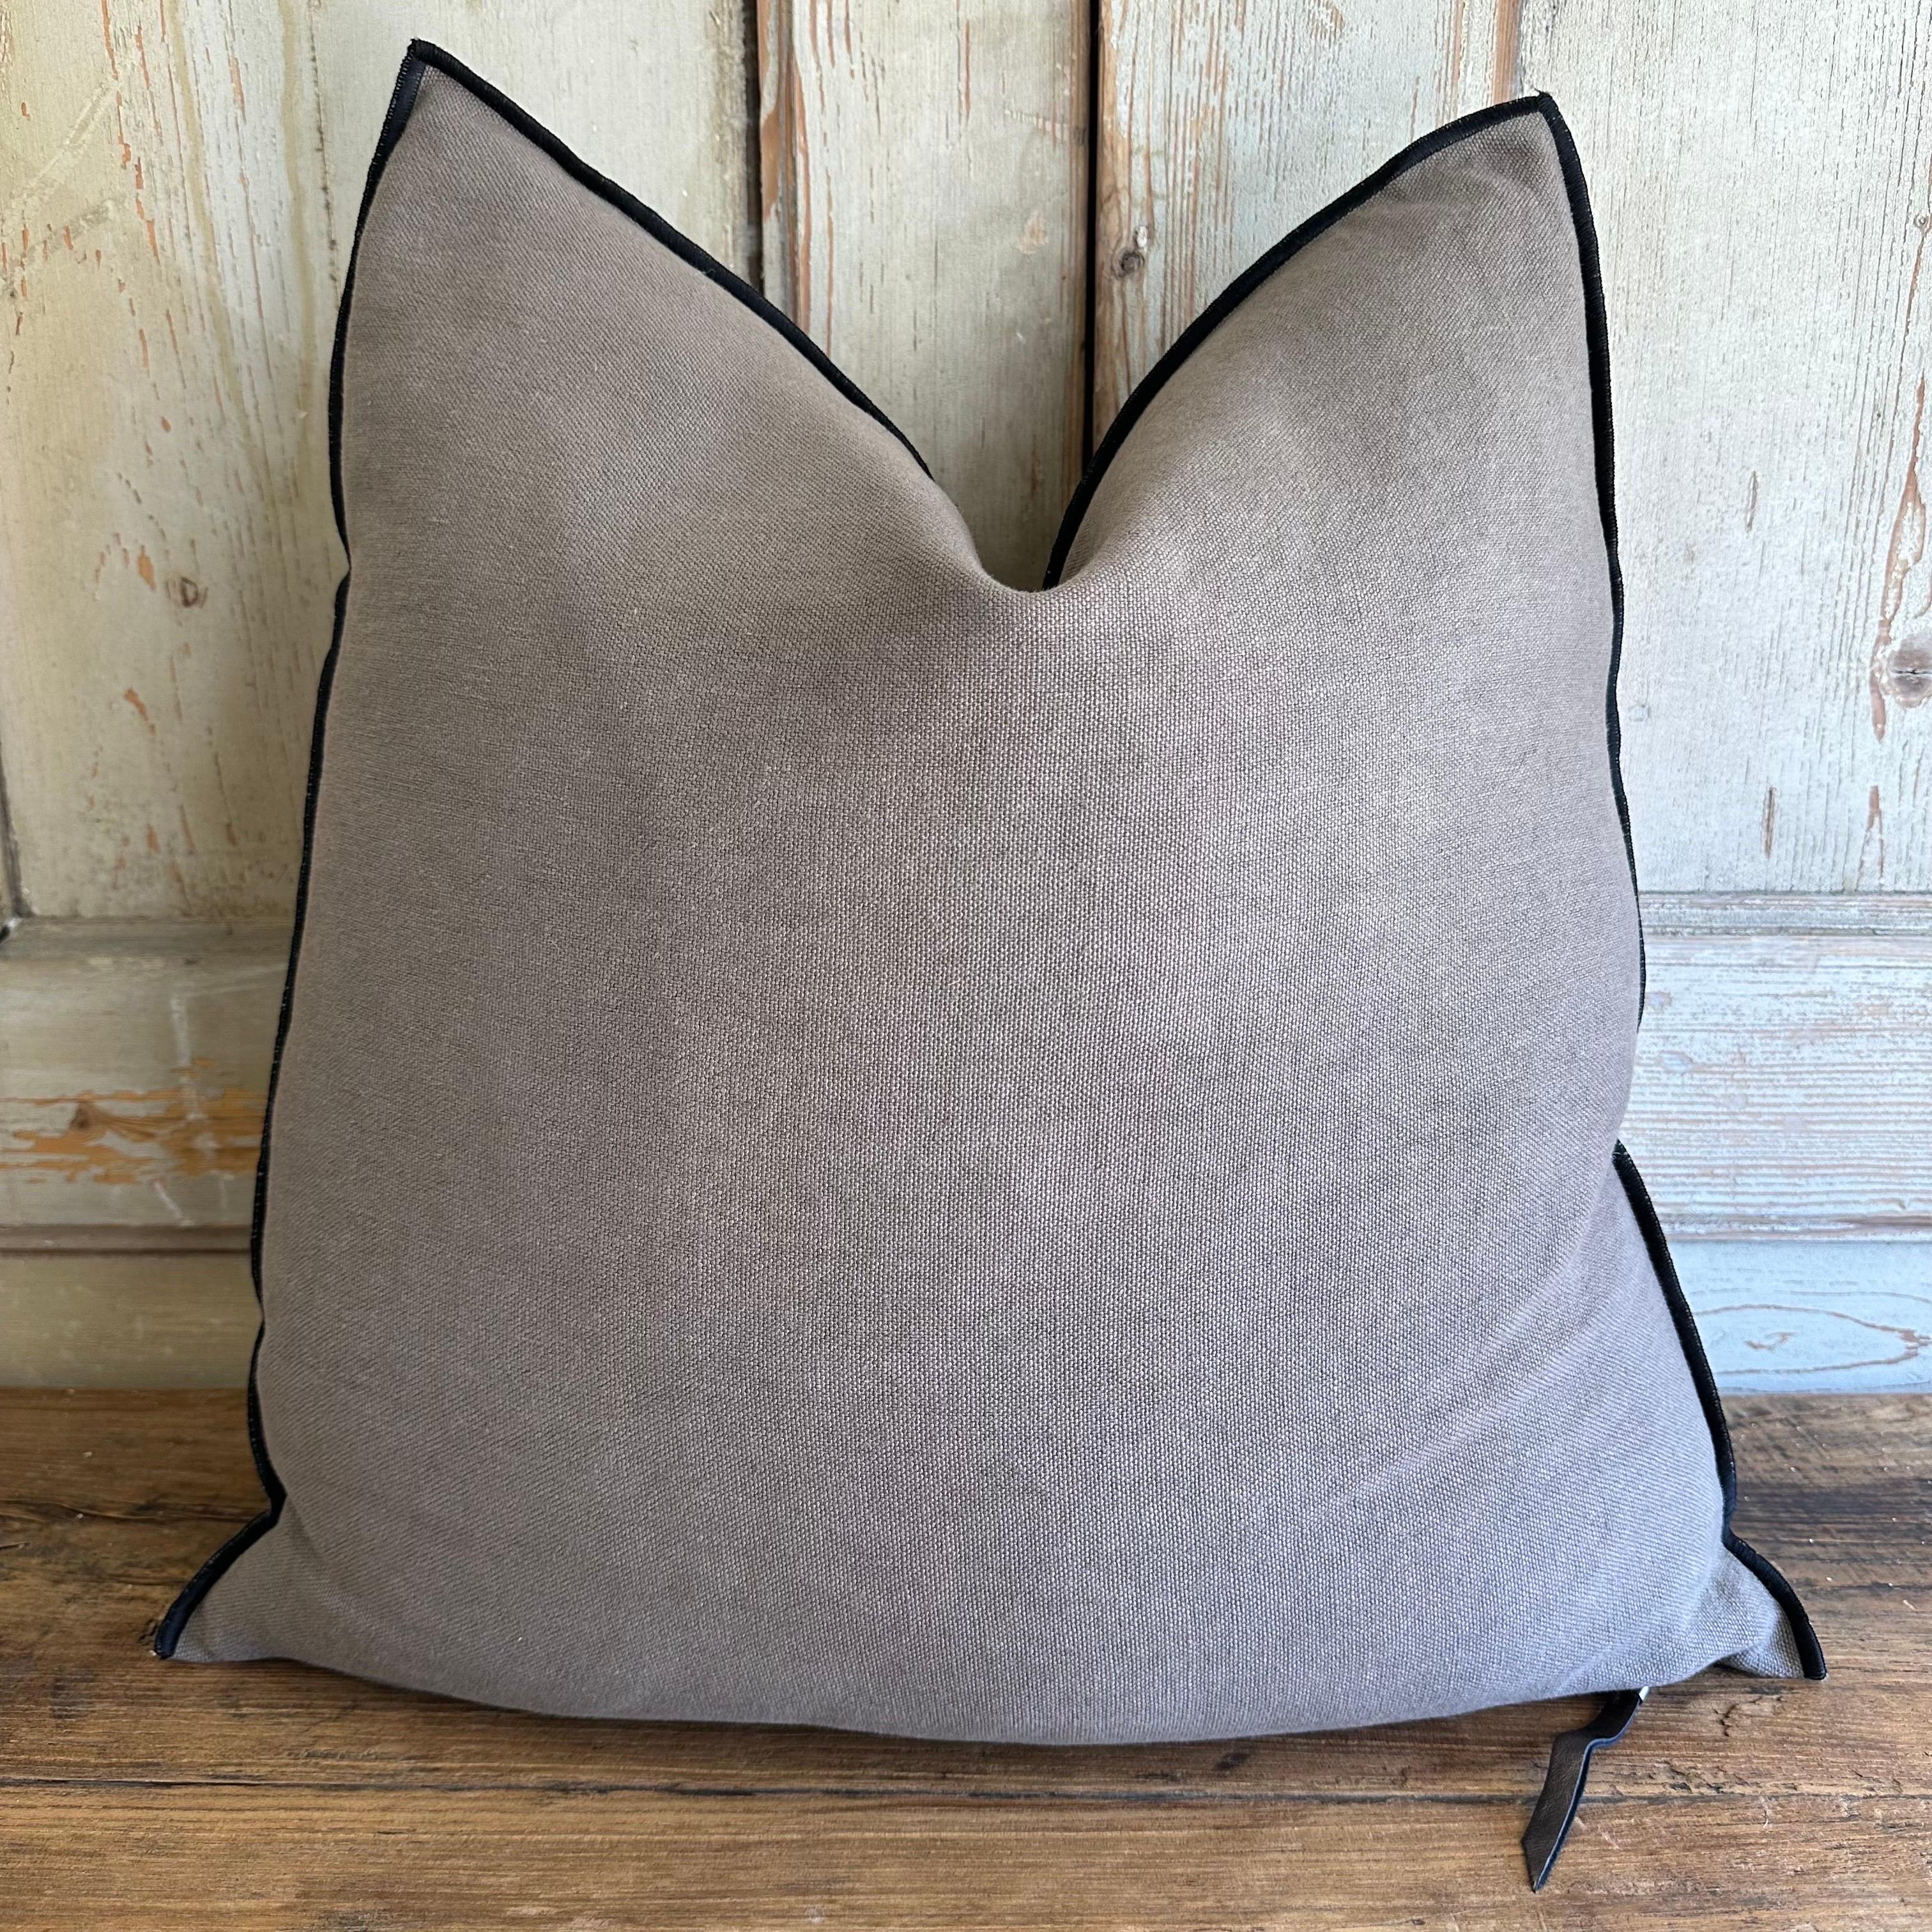 Custom linen blend accent pillow. 
Color: Ecorce / lavender - grey colored nubby textured stone washed linen pillow with a black stitched edge, metal zipper closure. 
Includes Down/Feather Insert.
Our pillows are constructed with vintage one of a